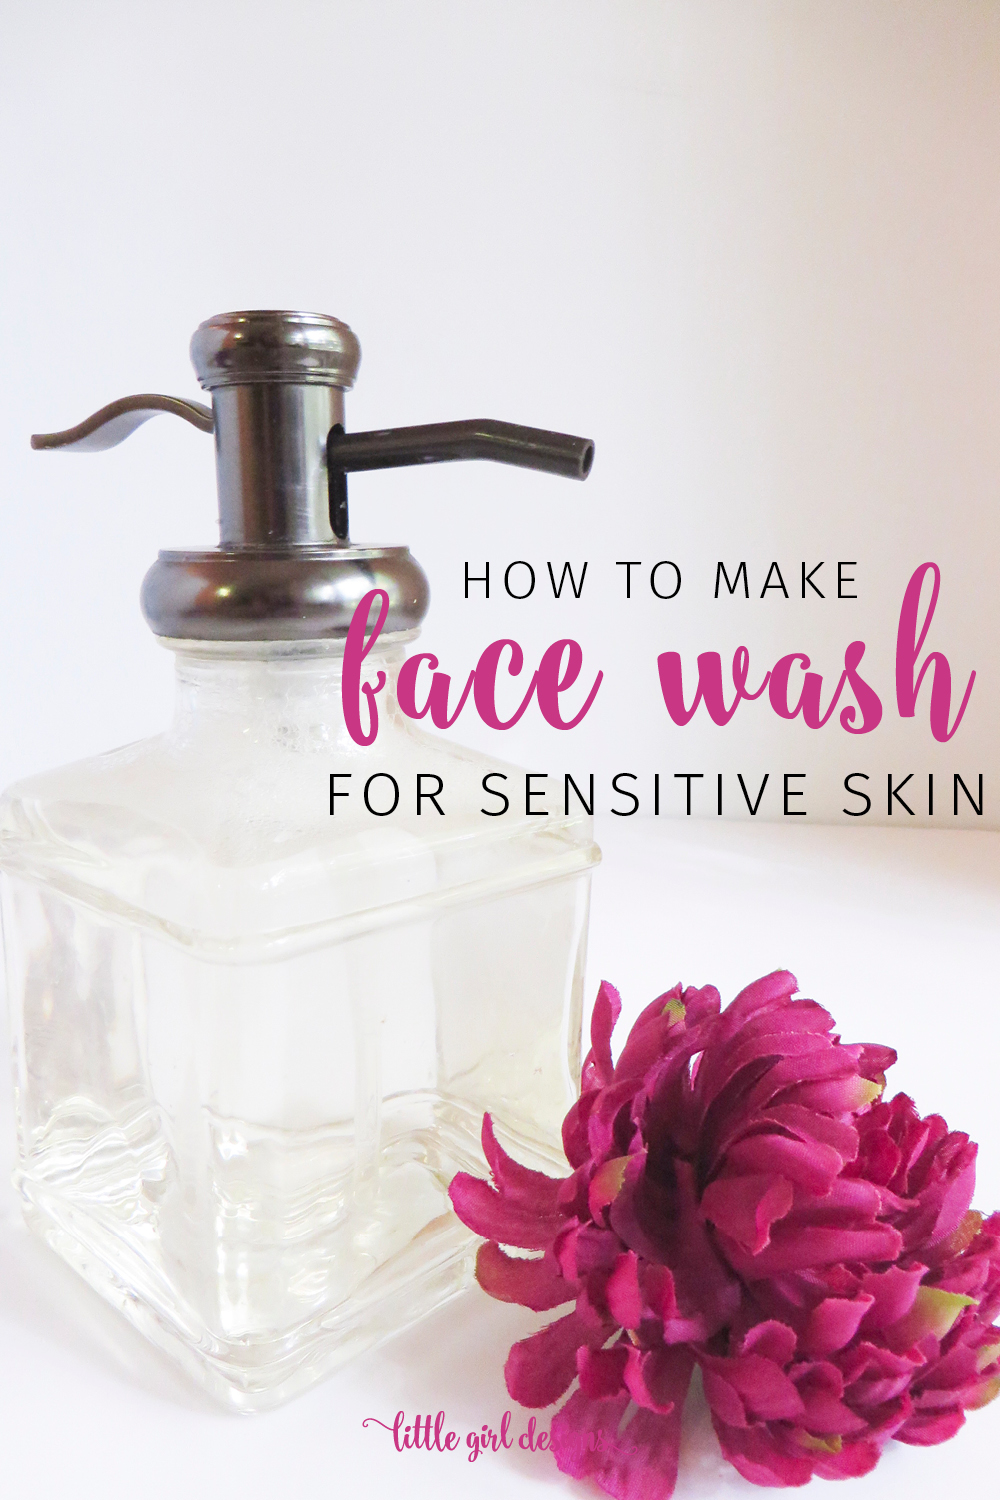 Learn how to make this homemade face wash with essential oils for sensitive skin. This natural face wash is gentle and smells amazing. I never thought I'd make my own foaming face cleanser but now I don't want to stop!